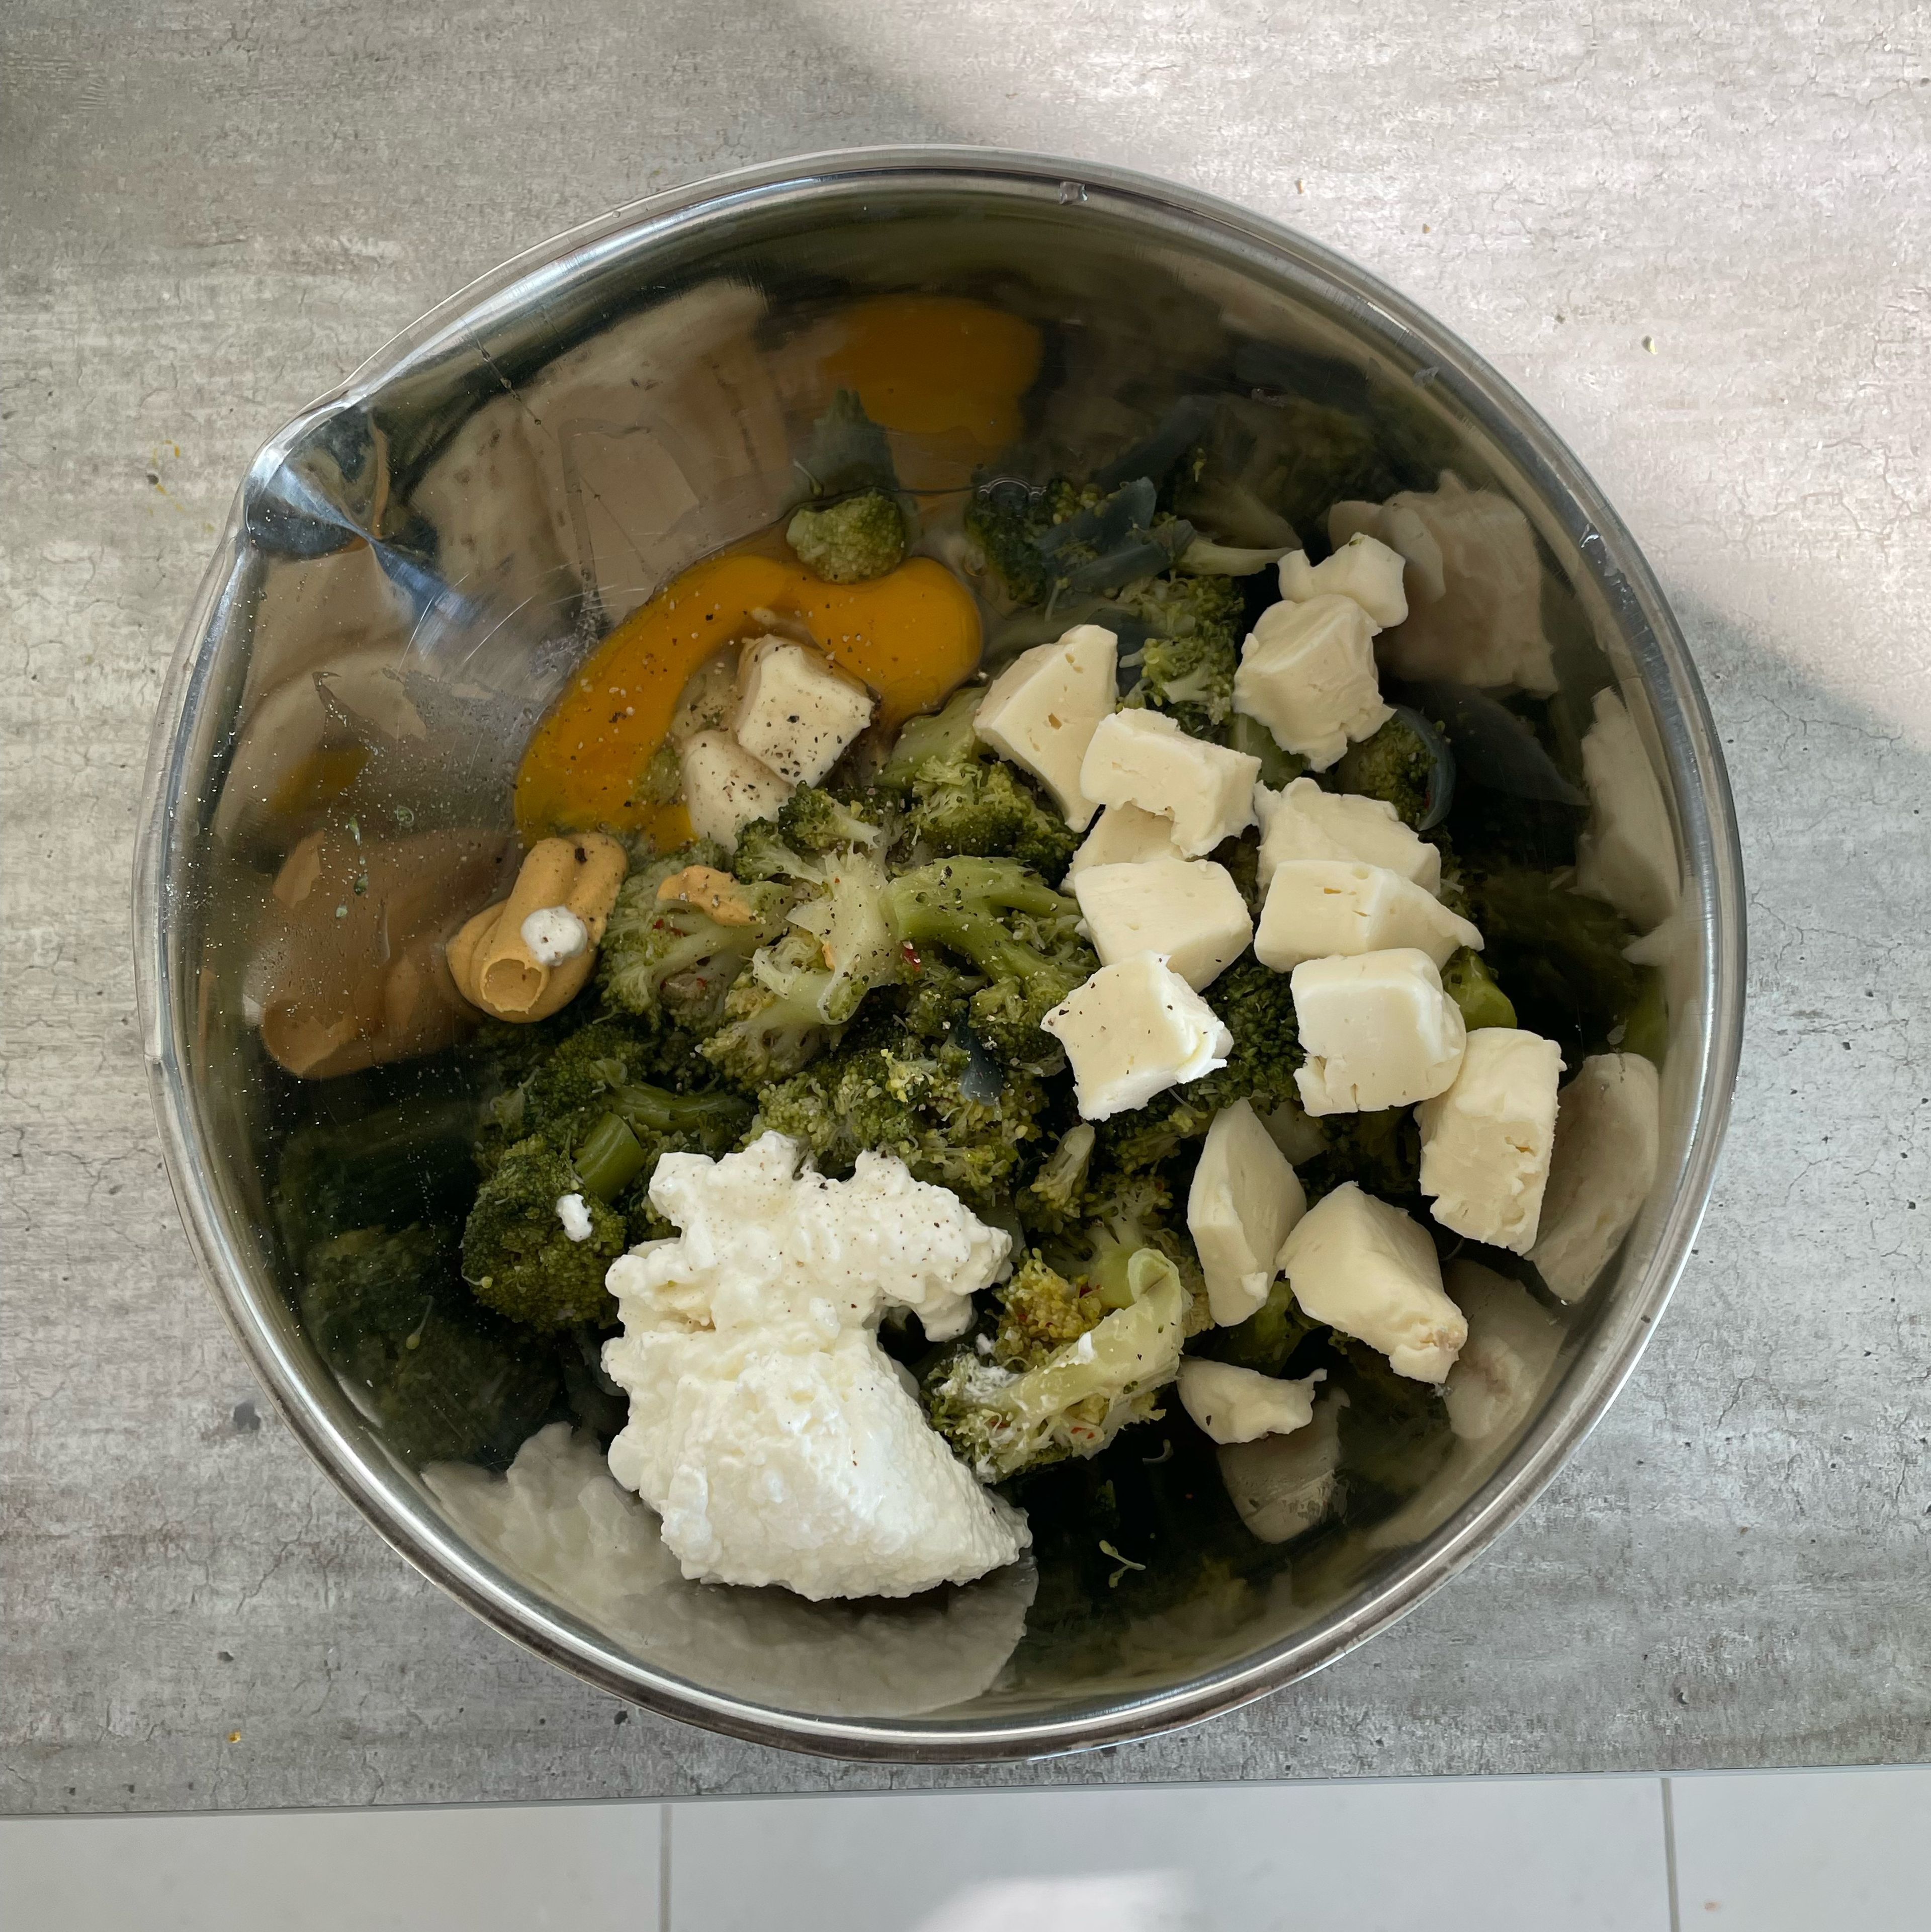 Add the cooked broccoli, egg, mustard, sliced taleggio cheese and cottage cheese to a bowl and mix all ingredients. You can add another pinch of salt and pepper if you like.